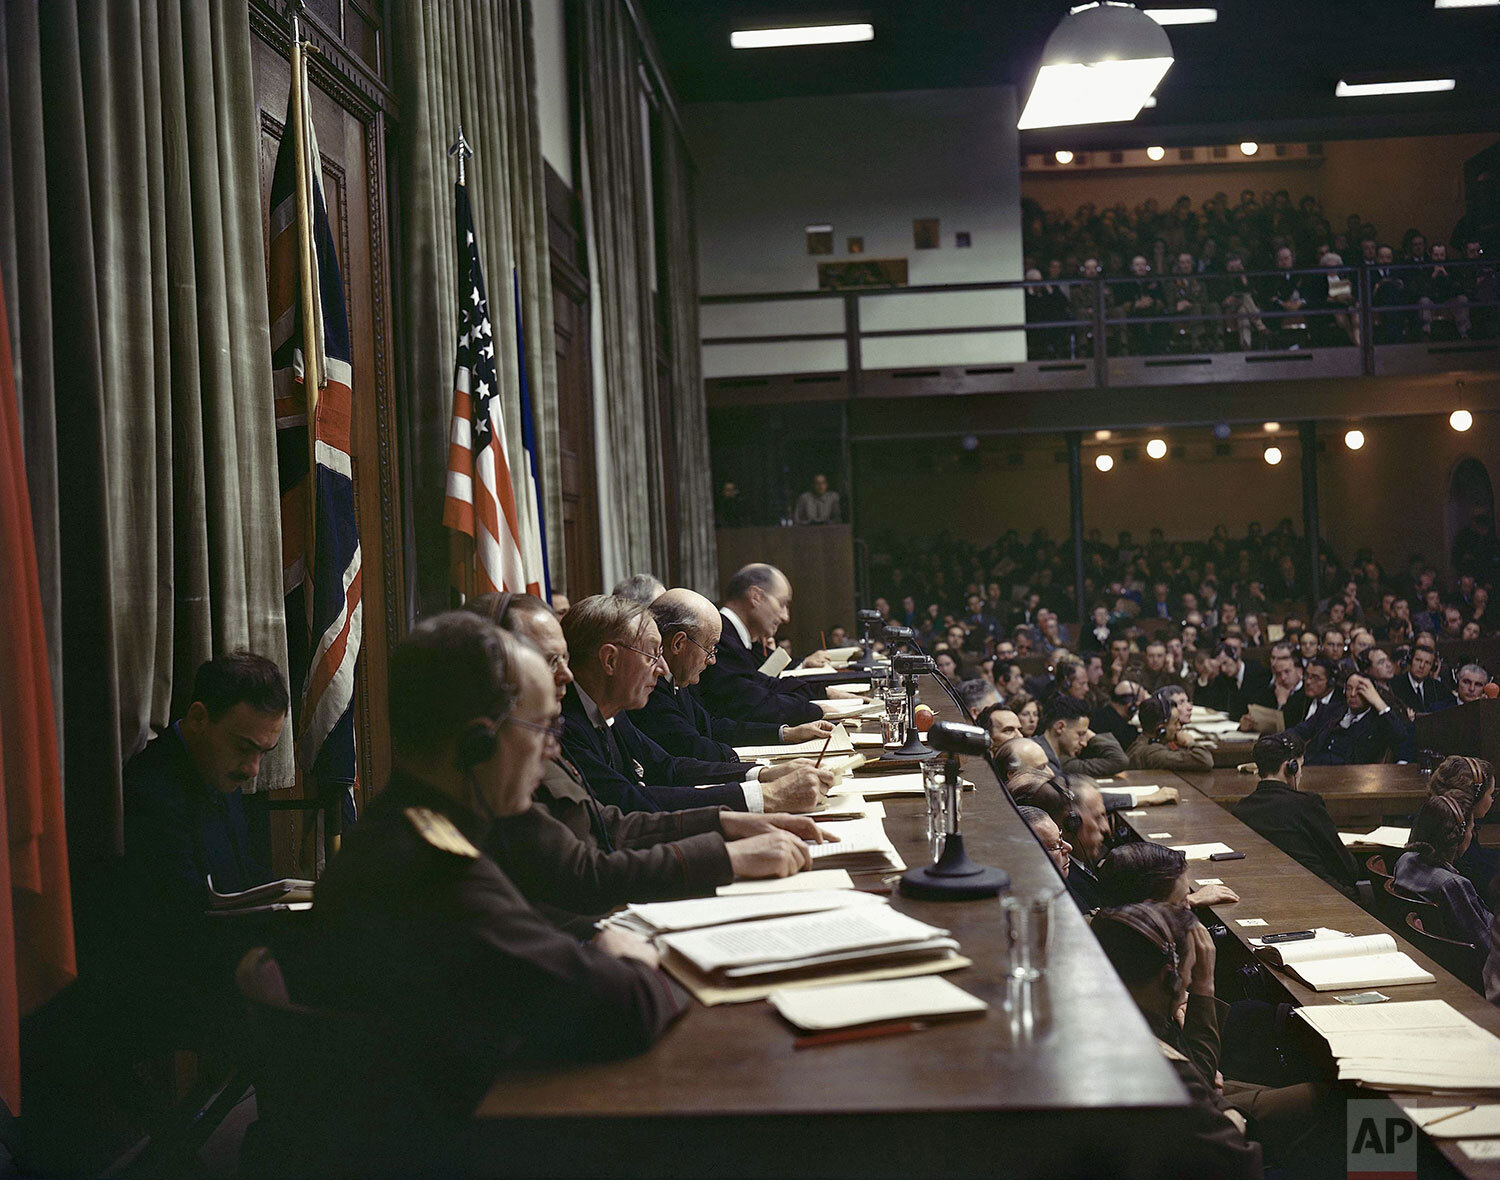  Members of the International Military Tribunal read the verdicts in the courtroom of the Palace of Justice in Nuremberg, Germany, on Sep. 30, 1946. (AP Photo/Eddie Worth) 